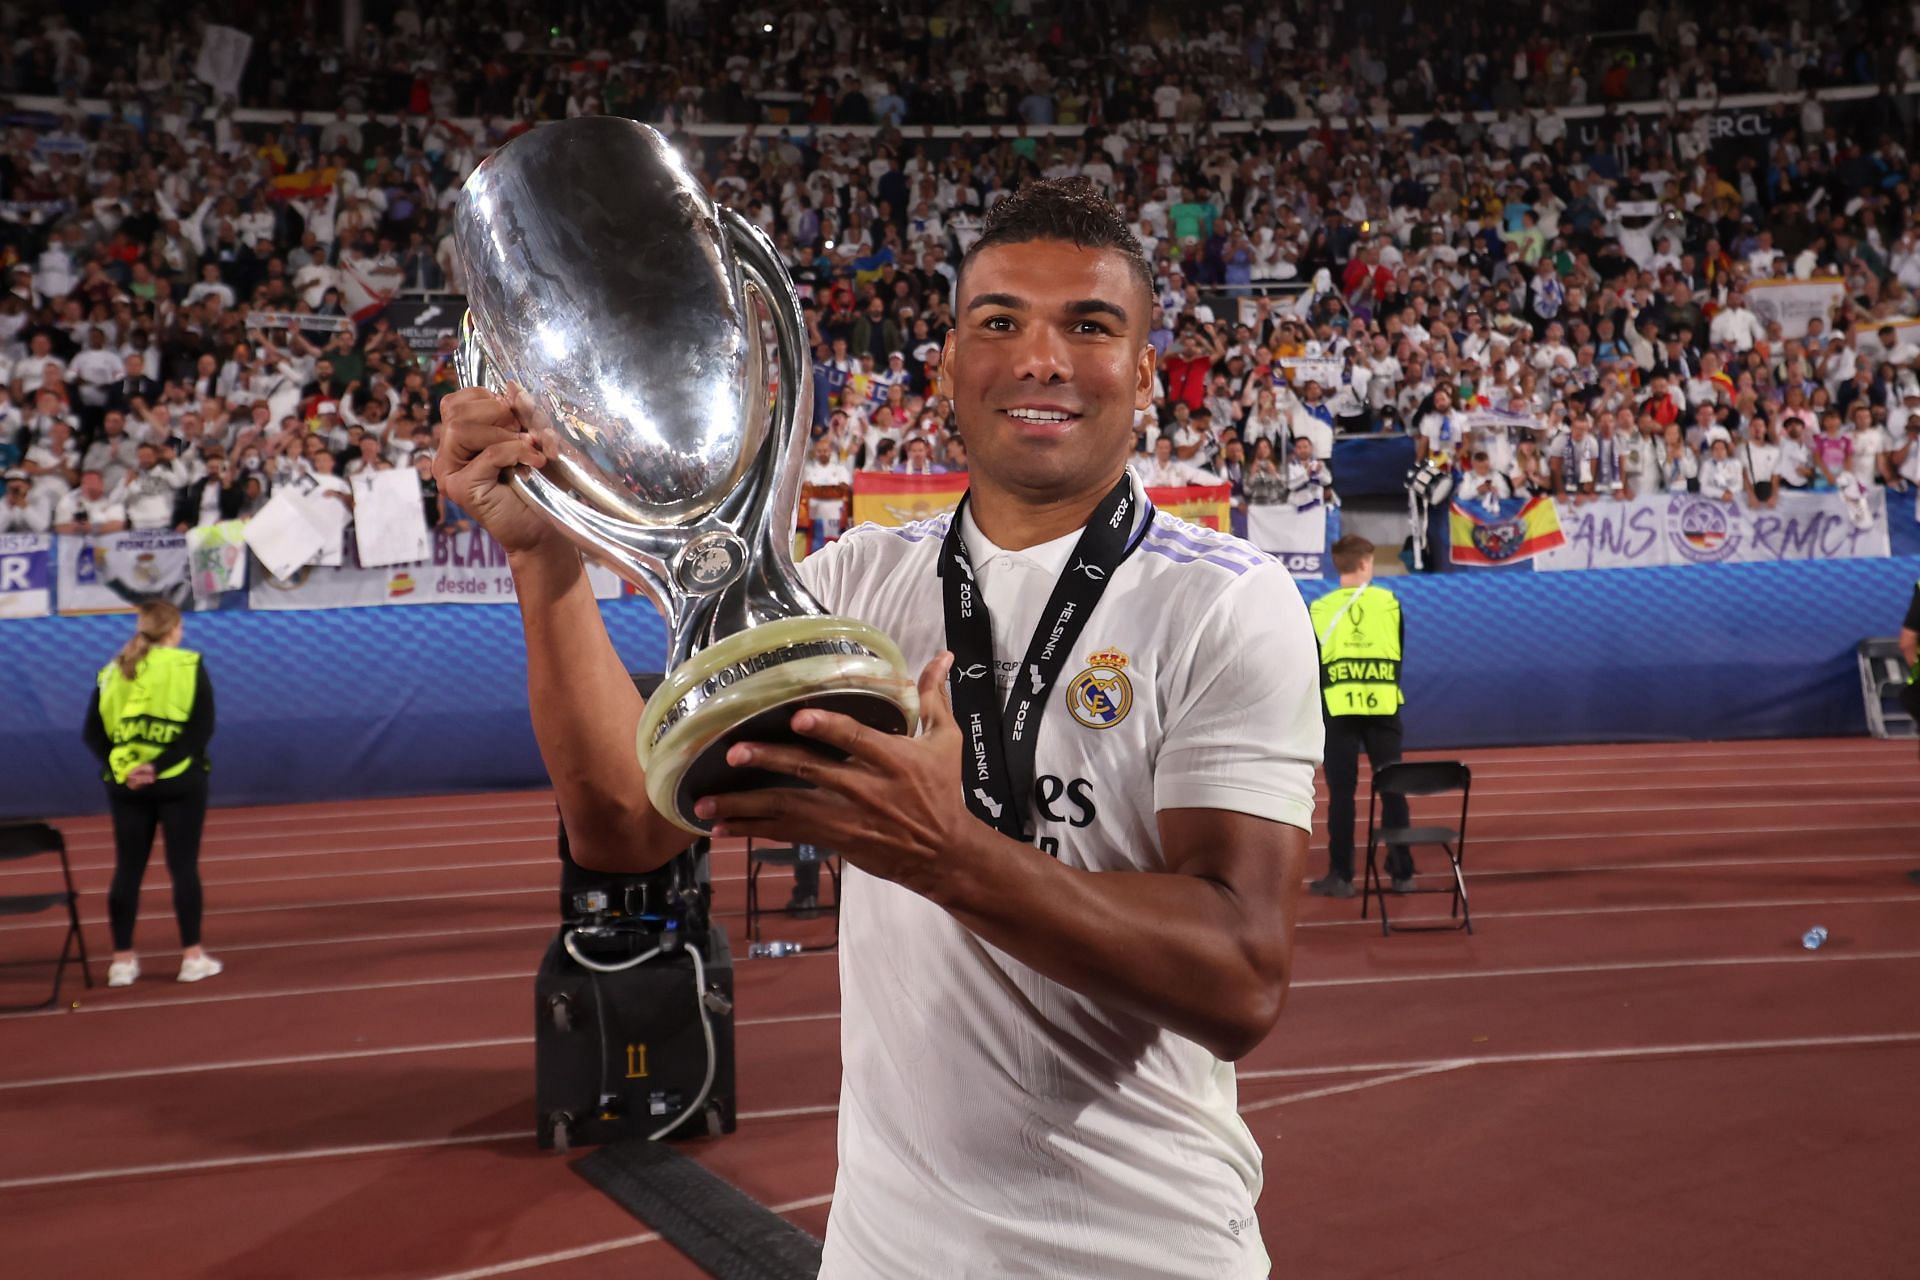 Casemiro is wanted at Old Trafford.